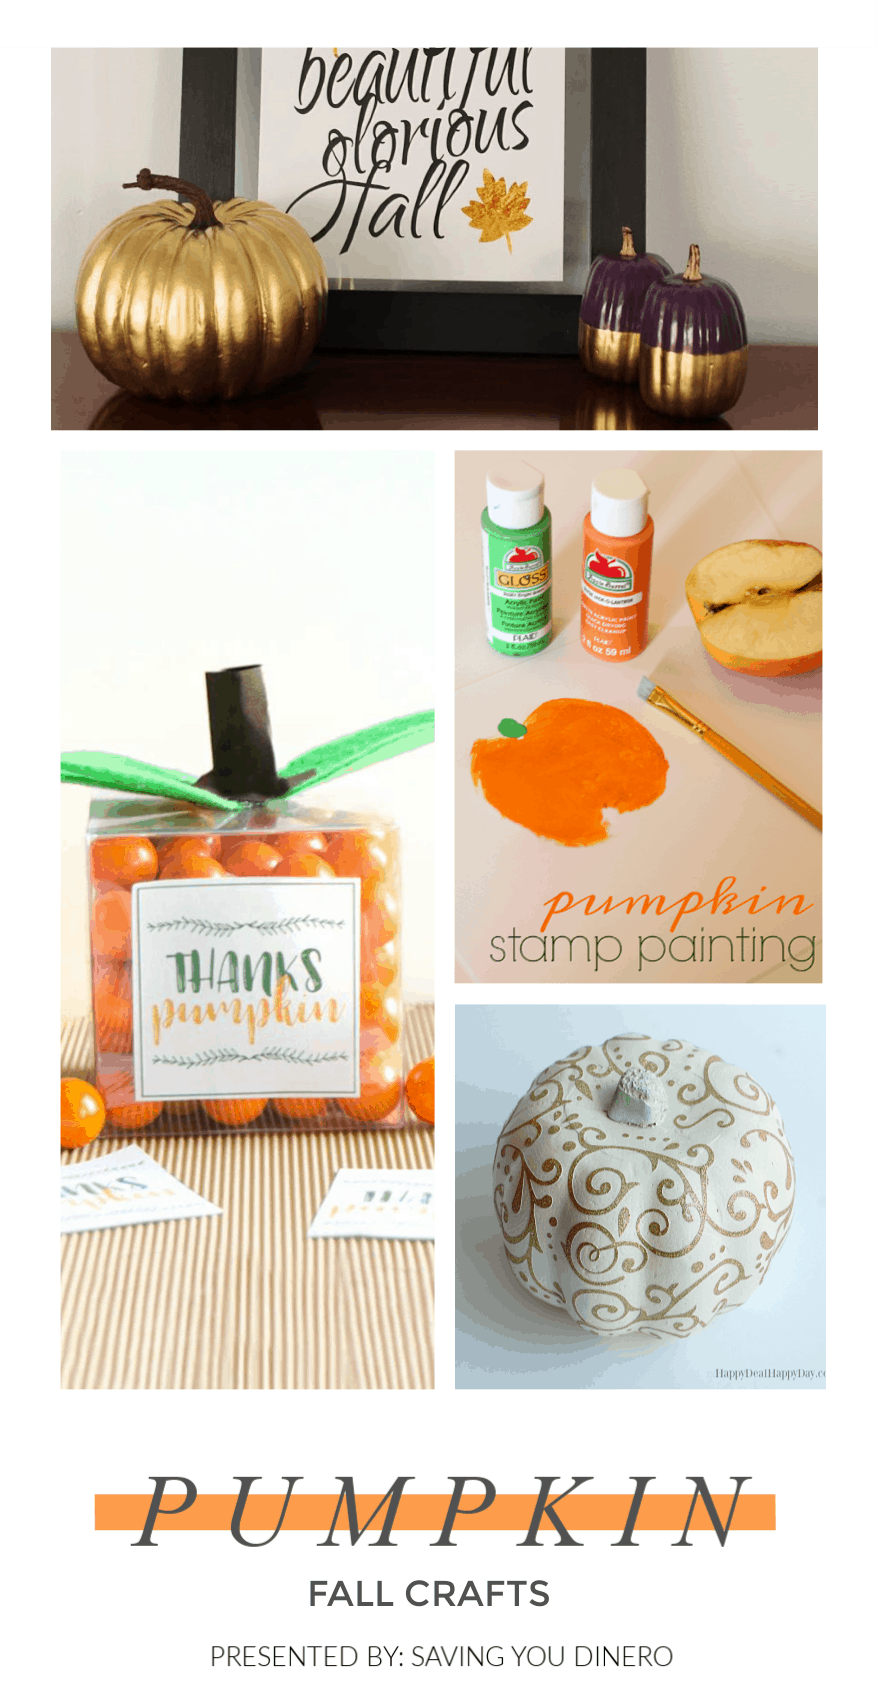 Check out these 20 Easy Fall Pumpkin Crafts for toddlers, kids, and adults! You could even make some of these in your classroom! #Fall #DIY #Crafts #Pumpkin